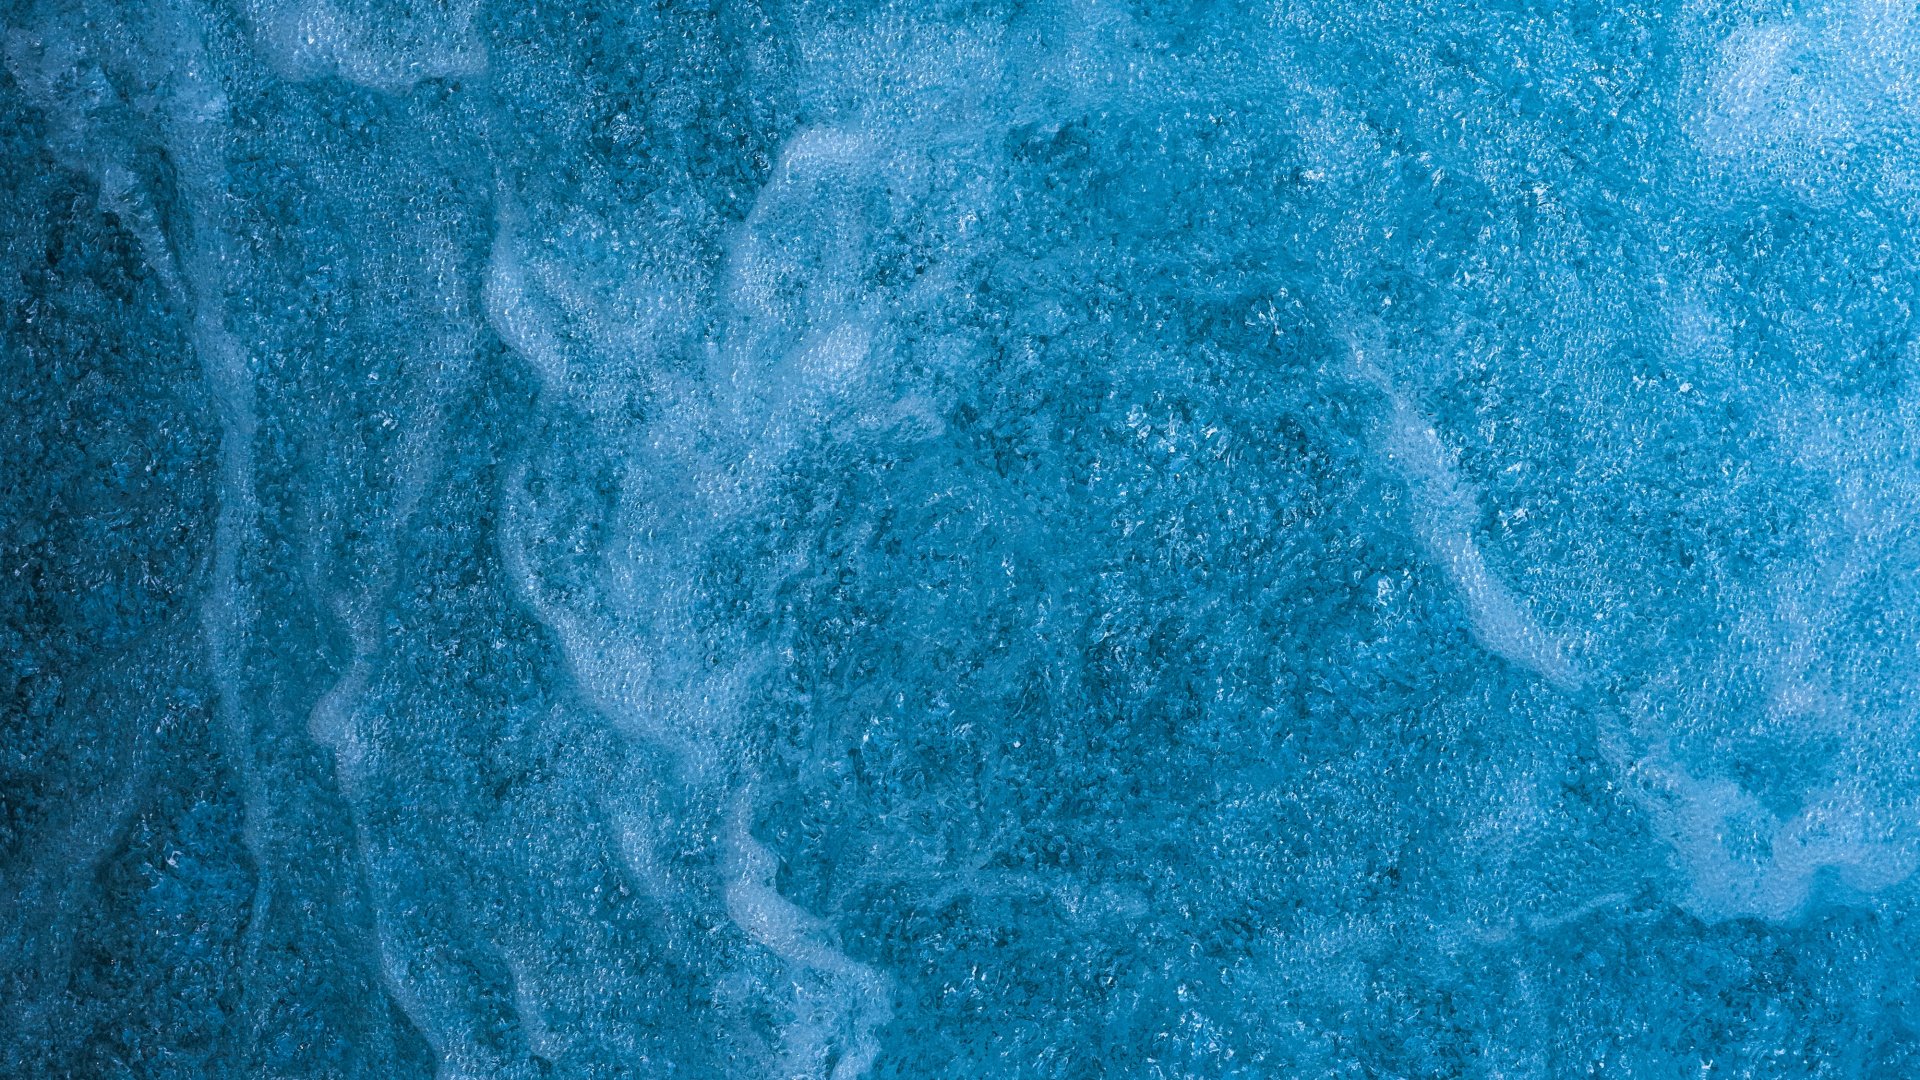 Texture, Water, Blue, Aqua, Turquoise. Wallpaper in 1920x1080 Resolution